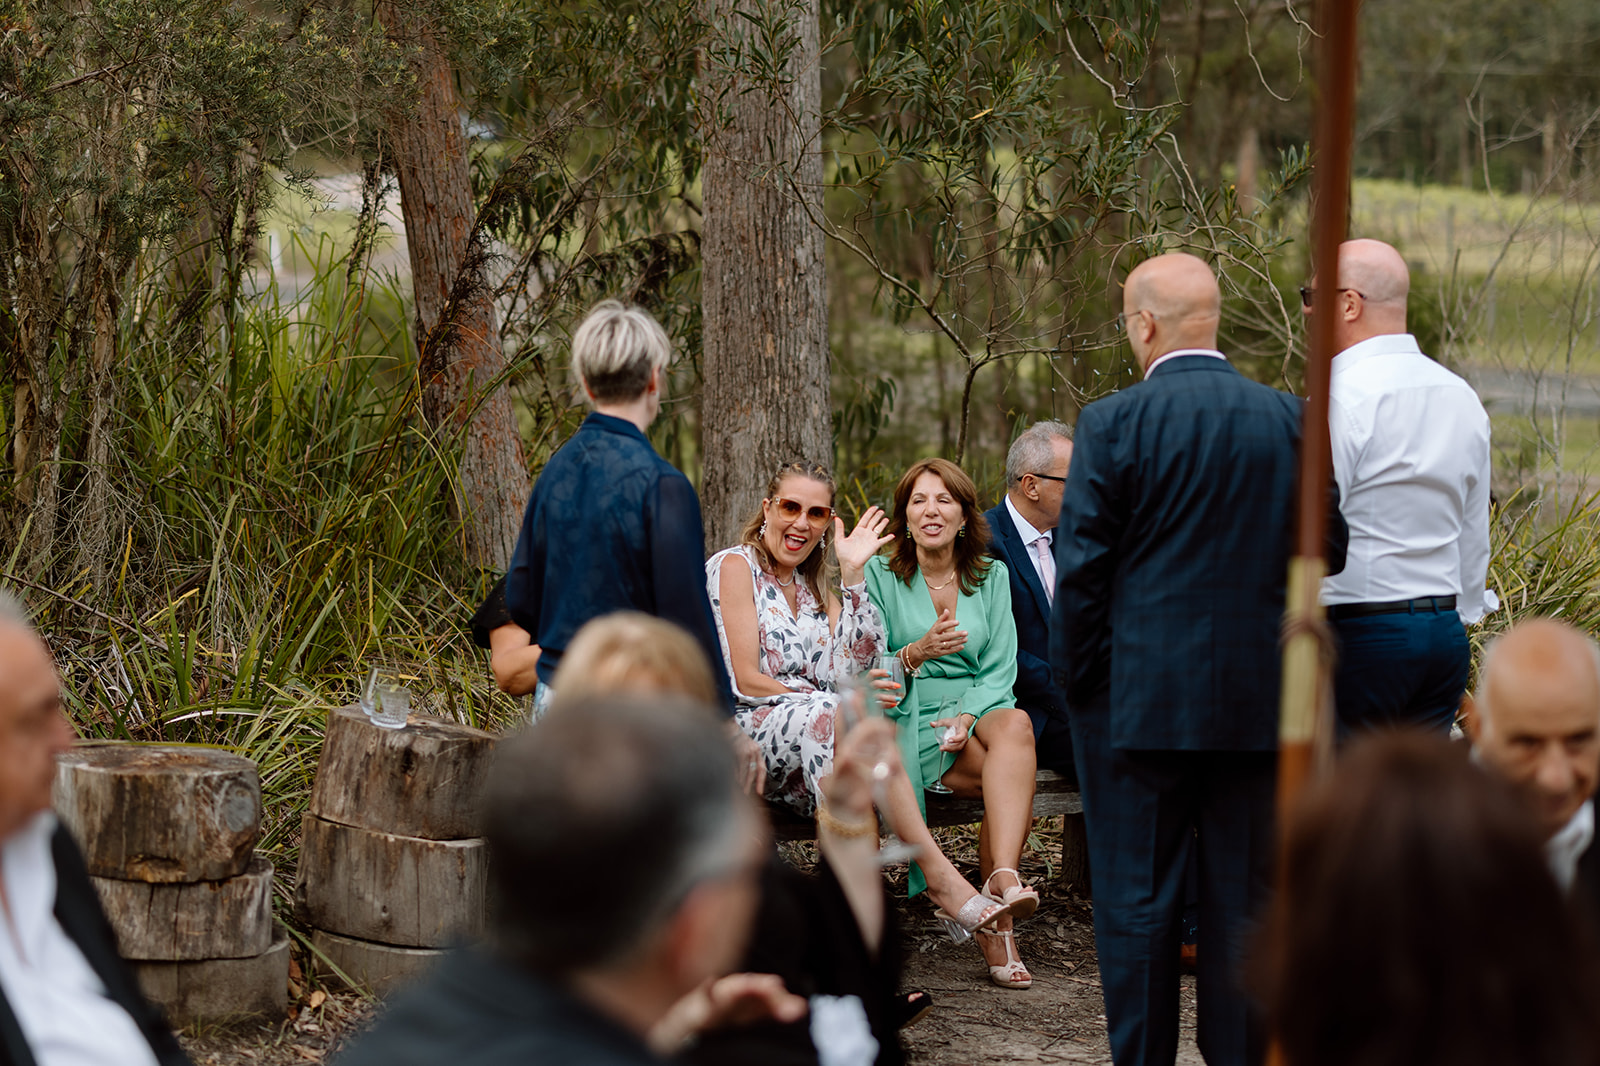 Guests at the wedding in the South Coast Bawley Vale Estate